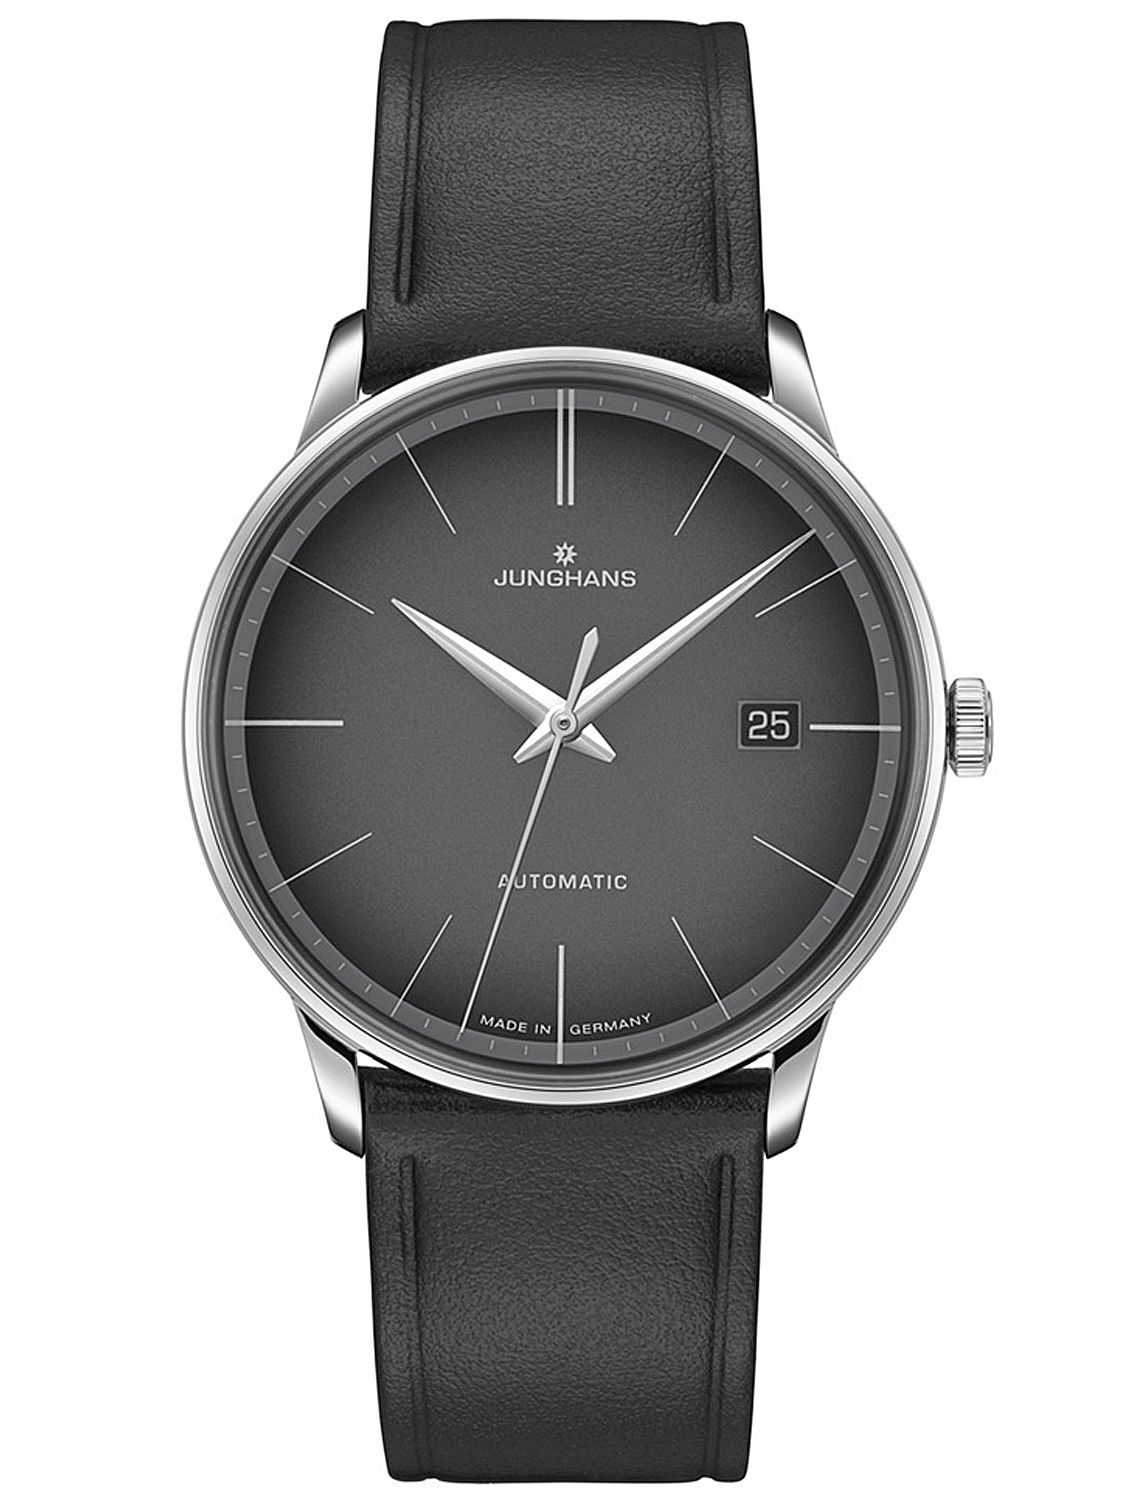 Junghans Men's Watch Meister Automatic Black Leather Strap 027